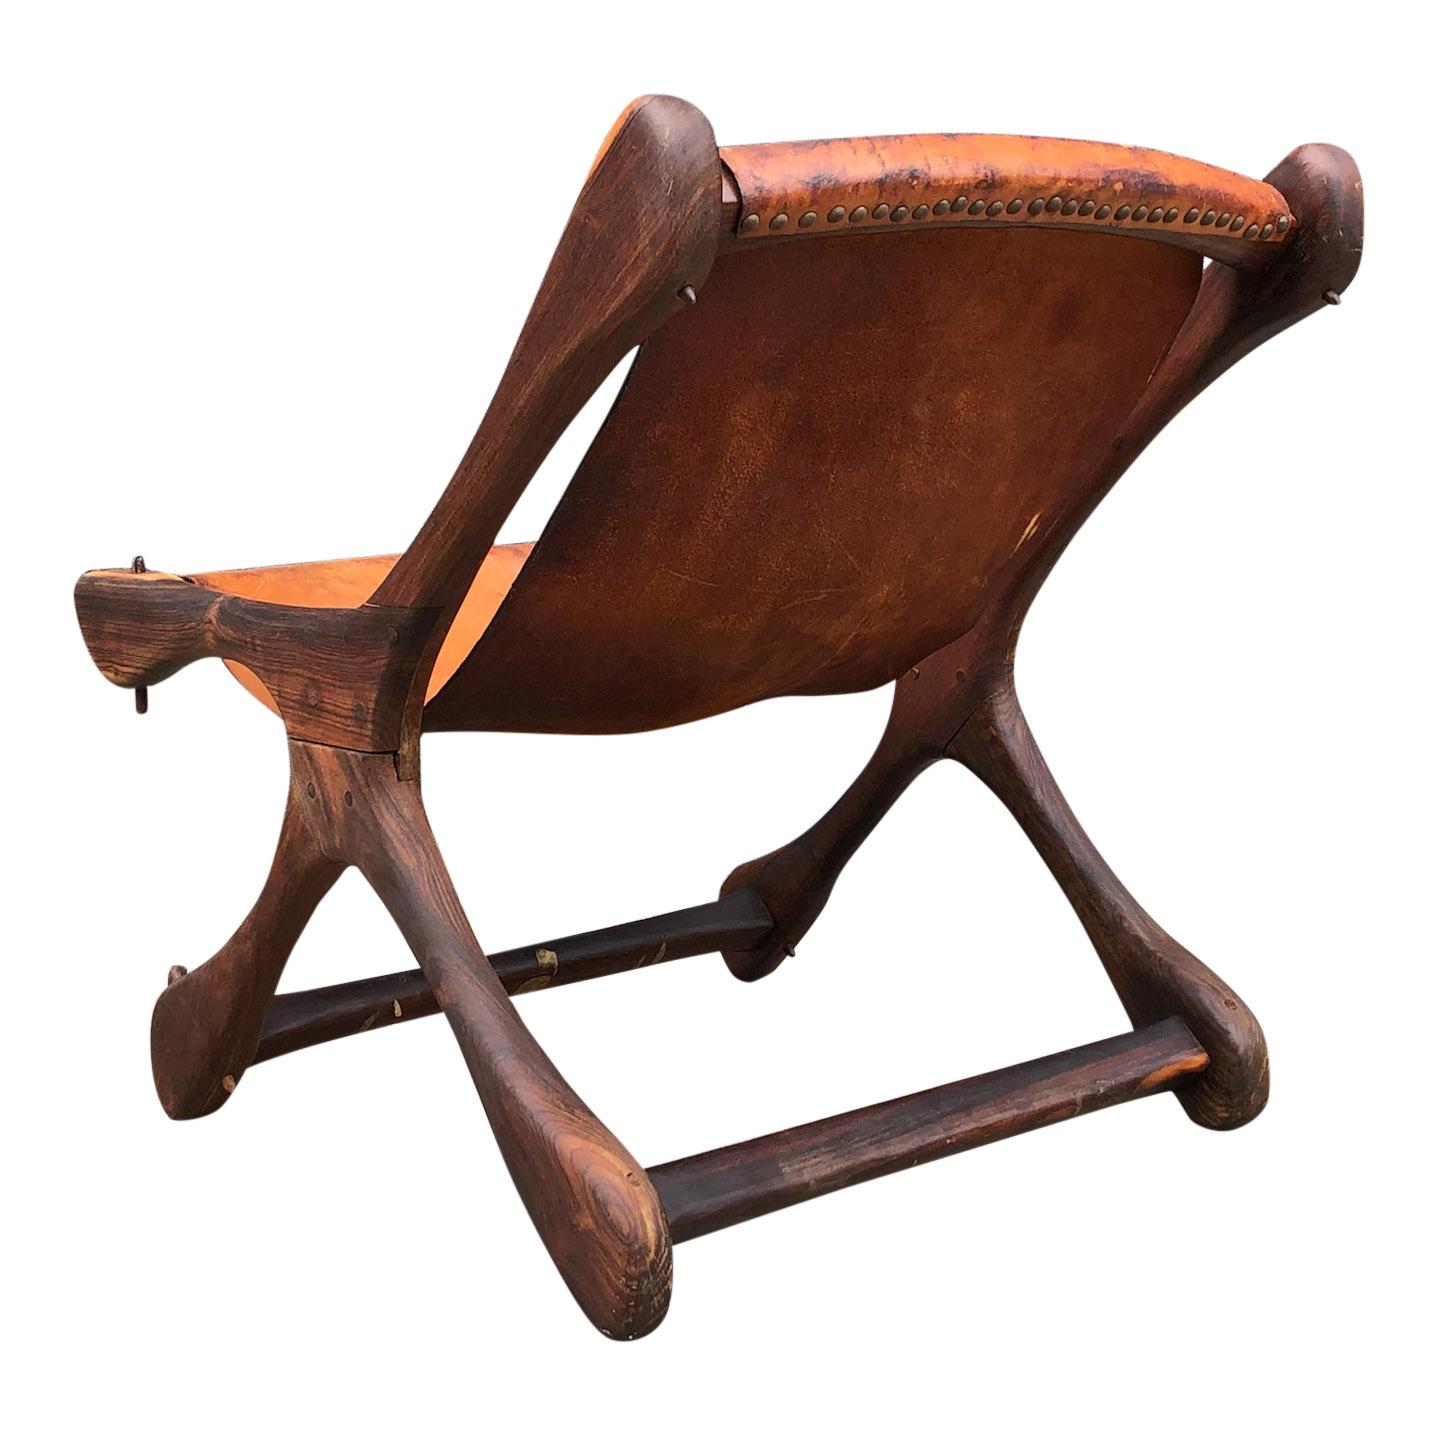 Wonderfully crafted lounge chair in rosewood / Cocobolo (one of the finest woods in the world). All original, some patina/cracking to the brown leather. Don S. Shoemaker is the most important and praised Mid-Century Modern furniture designer from